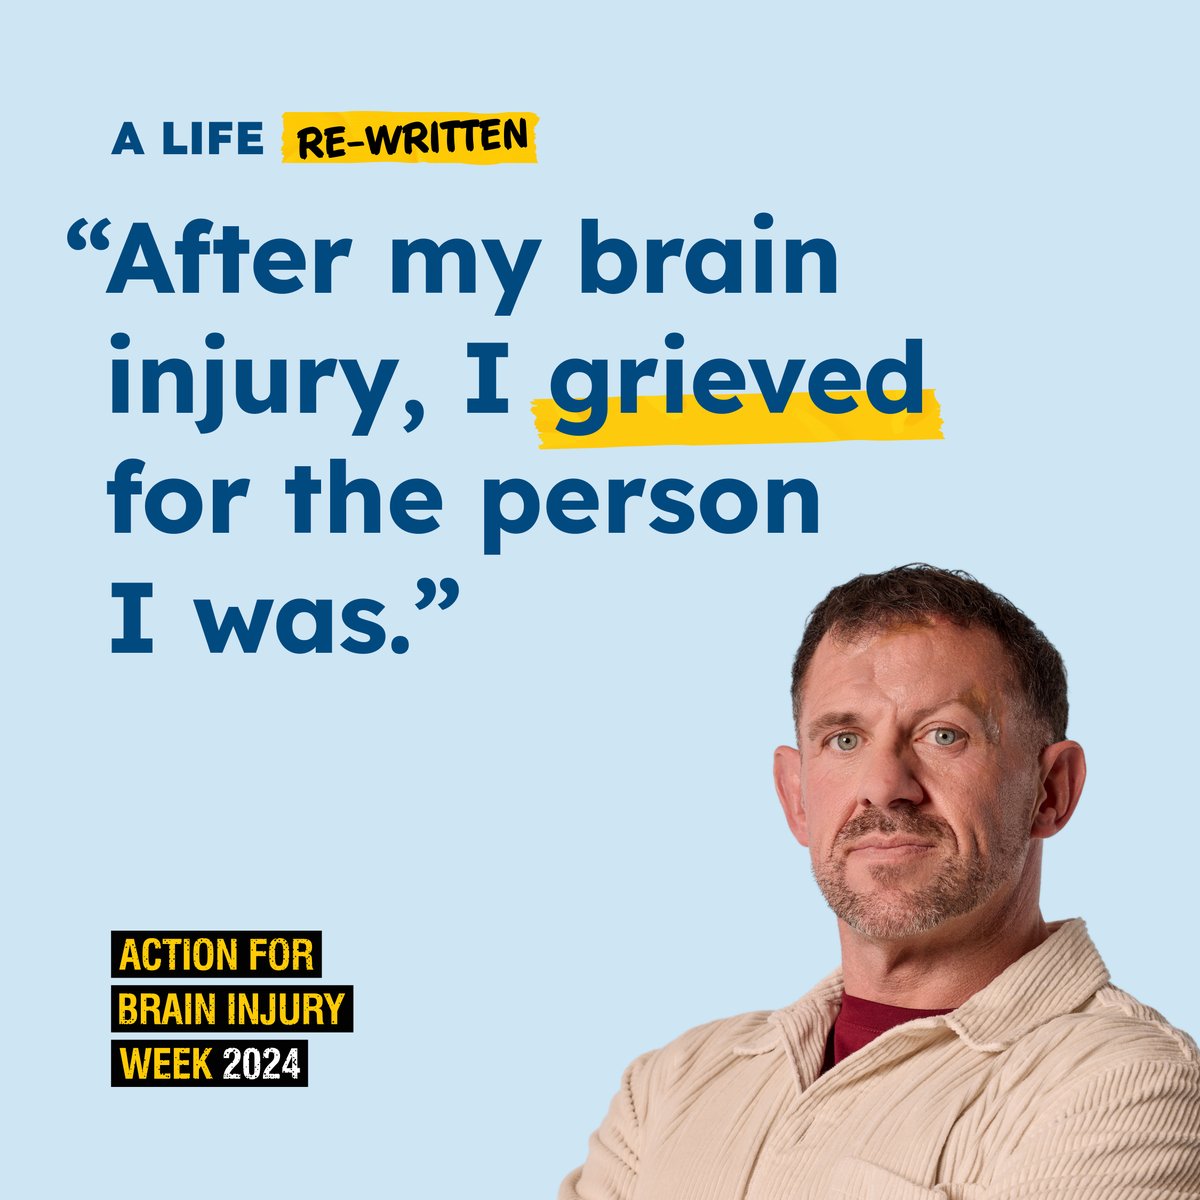 💬 'After my brain injury, I grieved for the person I was.'

This ABI Week, Headway is highlighting 'A Life Rewritten.'
Let's support each other in embracing our new paths and finding strength in our stories. 
Feel free to comment below!

#HeadwaySussex #Headway #ABIWeek